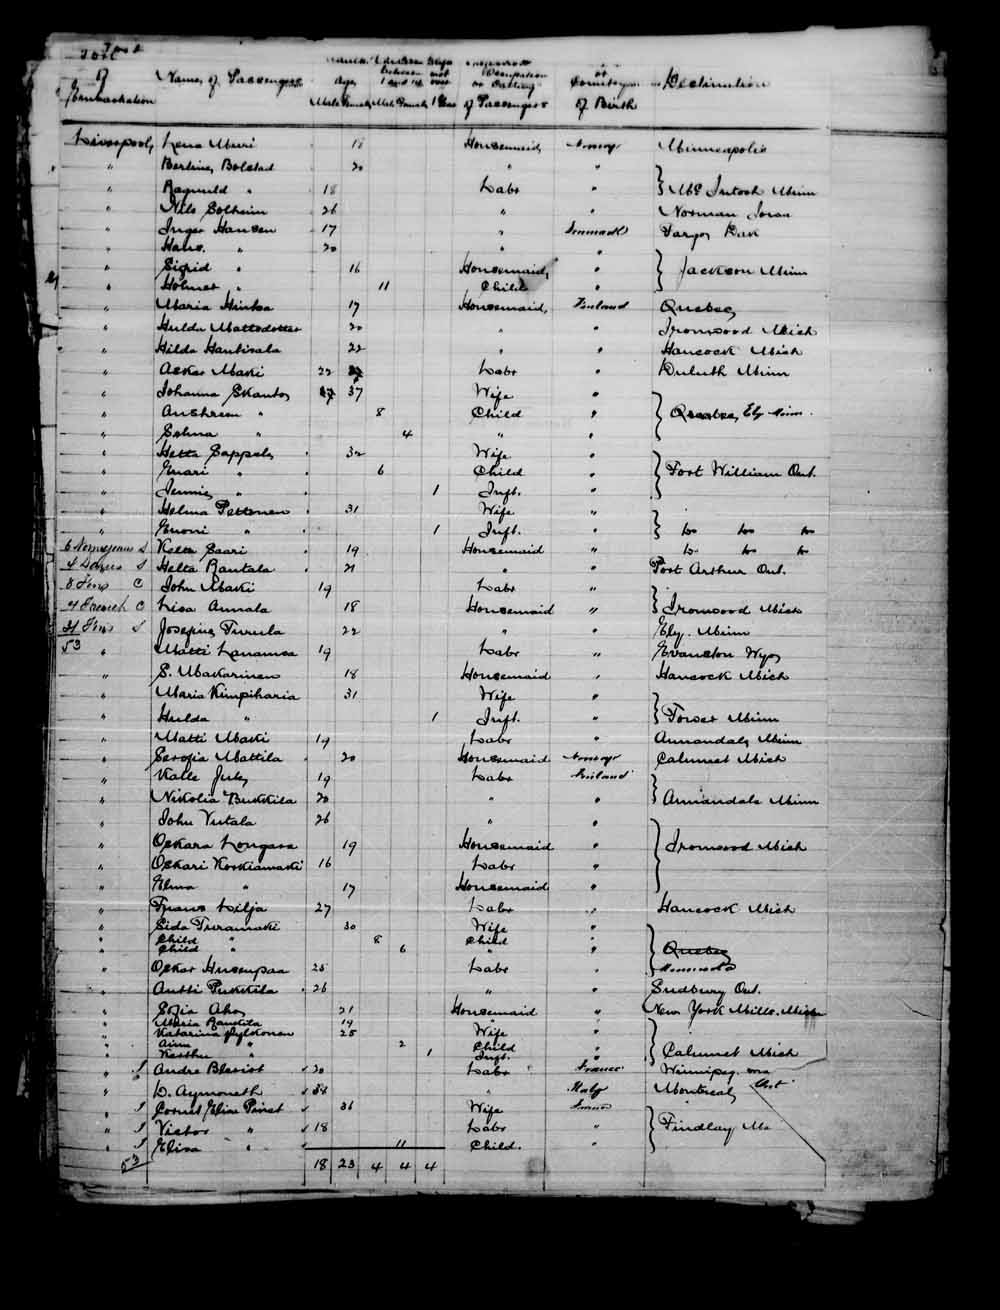 Digitized page of Quebec Passenger Lists for Image No.: e003555653